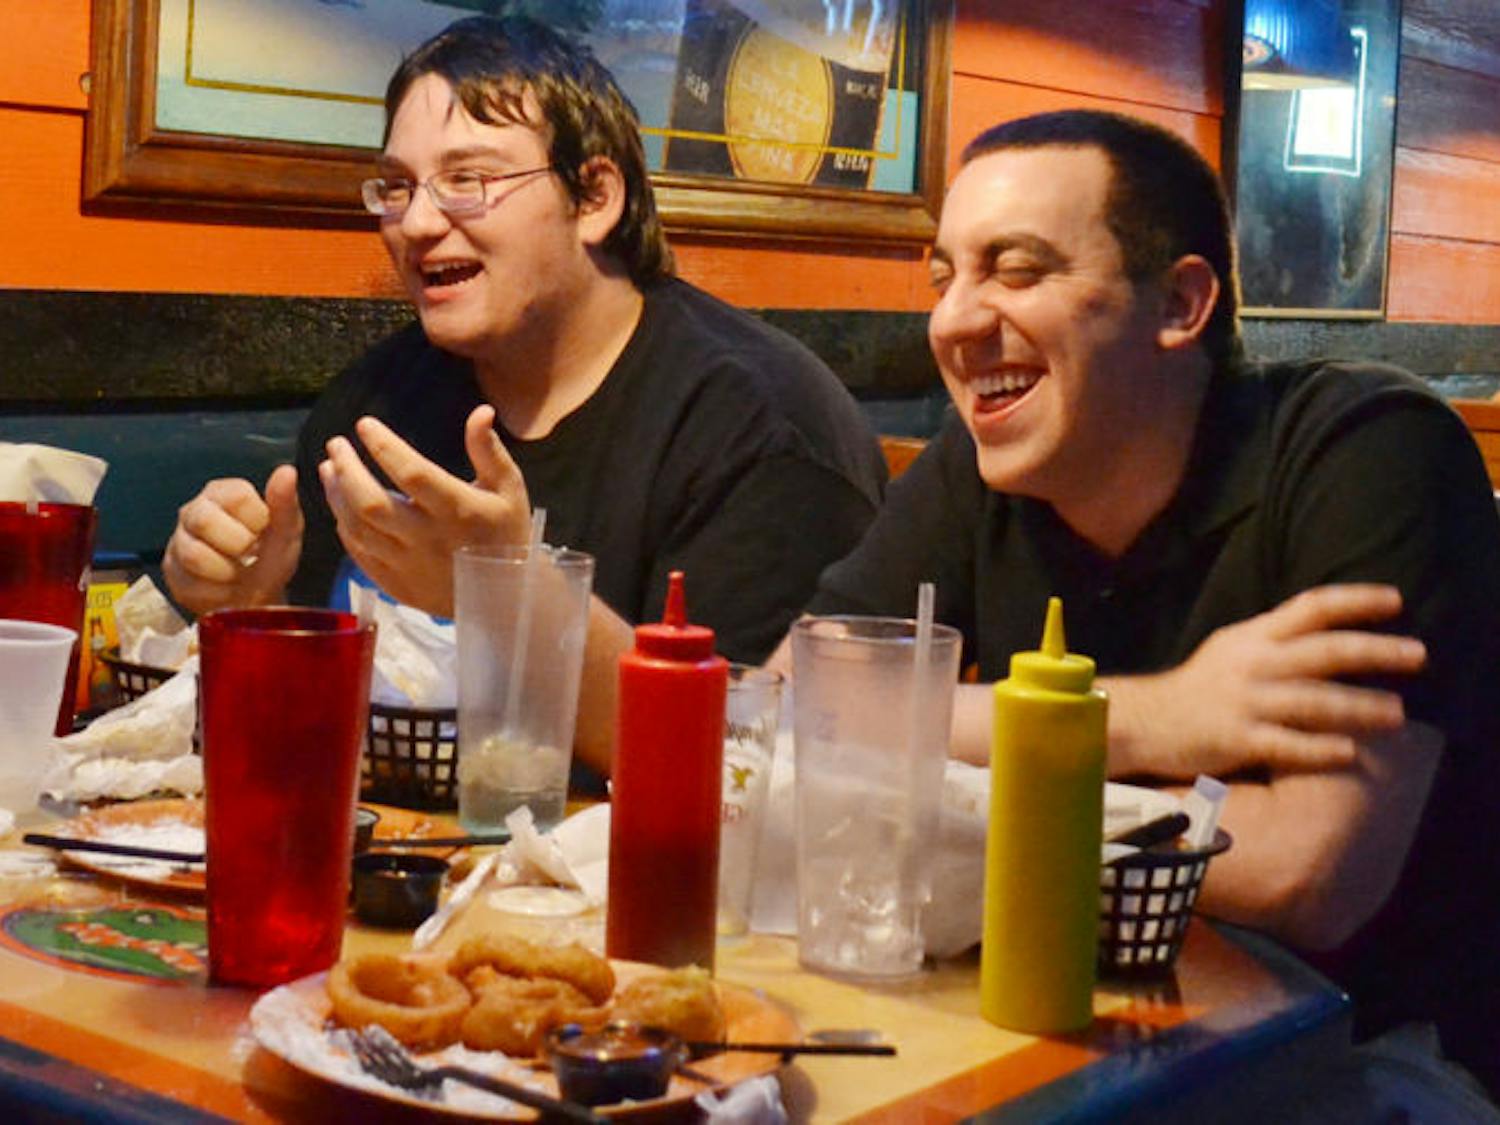 UF telecommunication freshman Matthew Szlasa, 19, and accounting graduate student Jacob Sperber, 23, eat wings and share some laughs at Gator City on Tuesday evening.